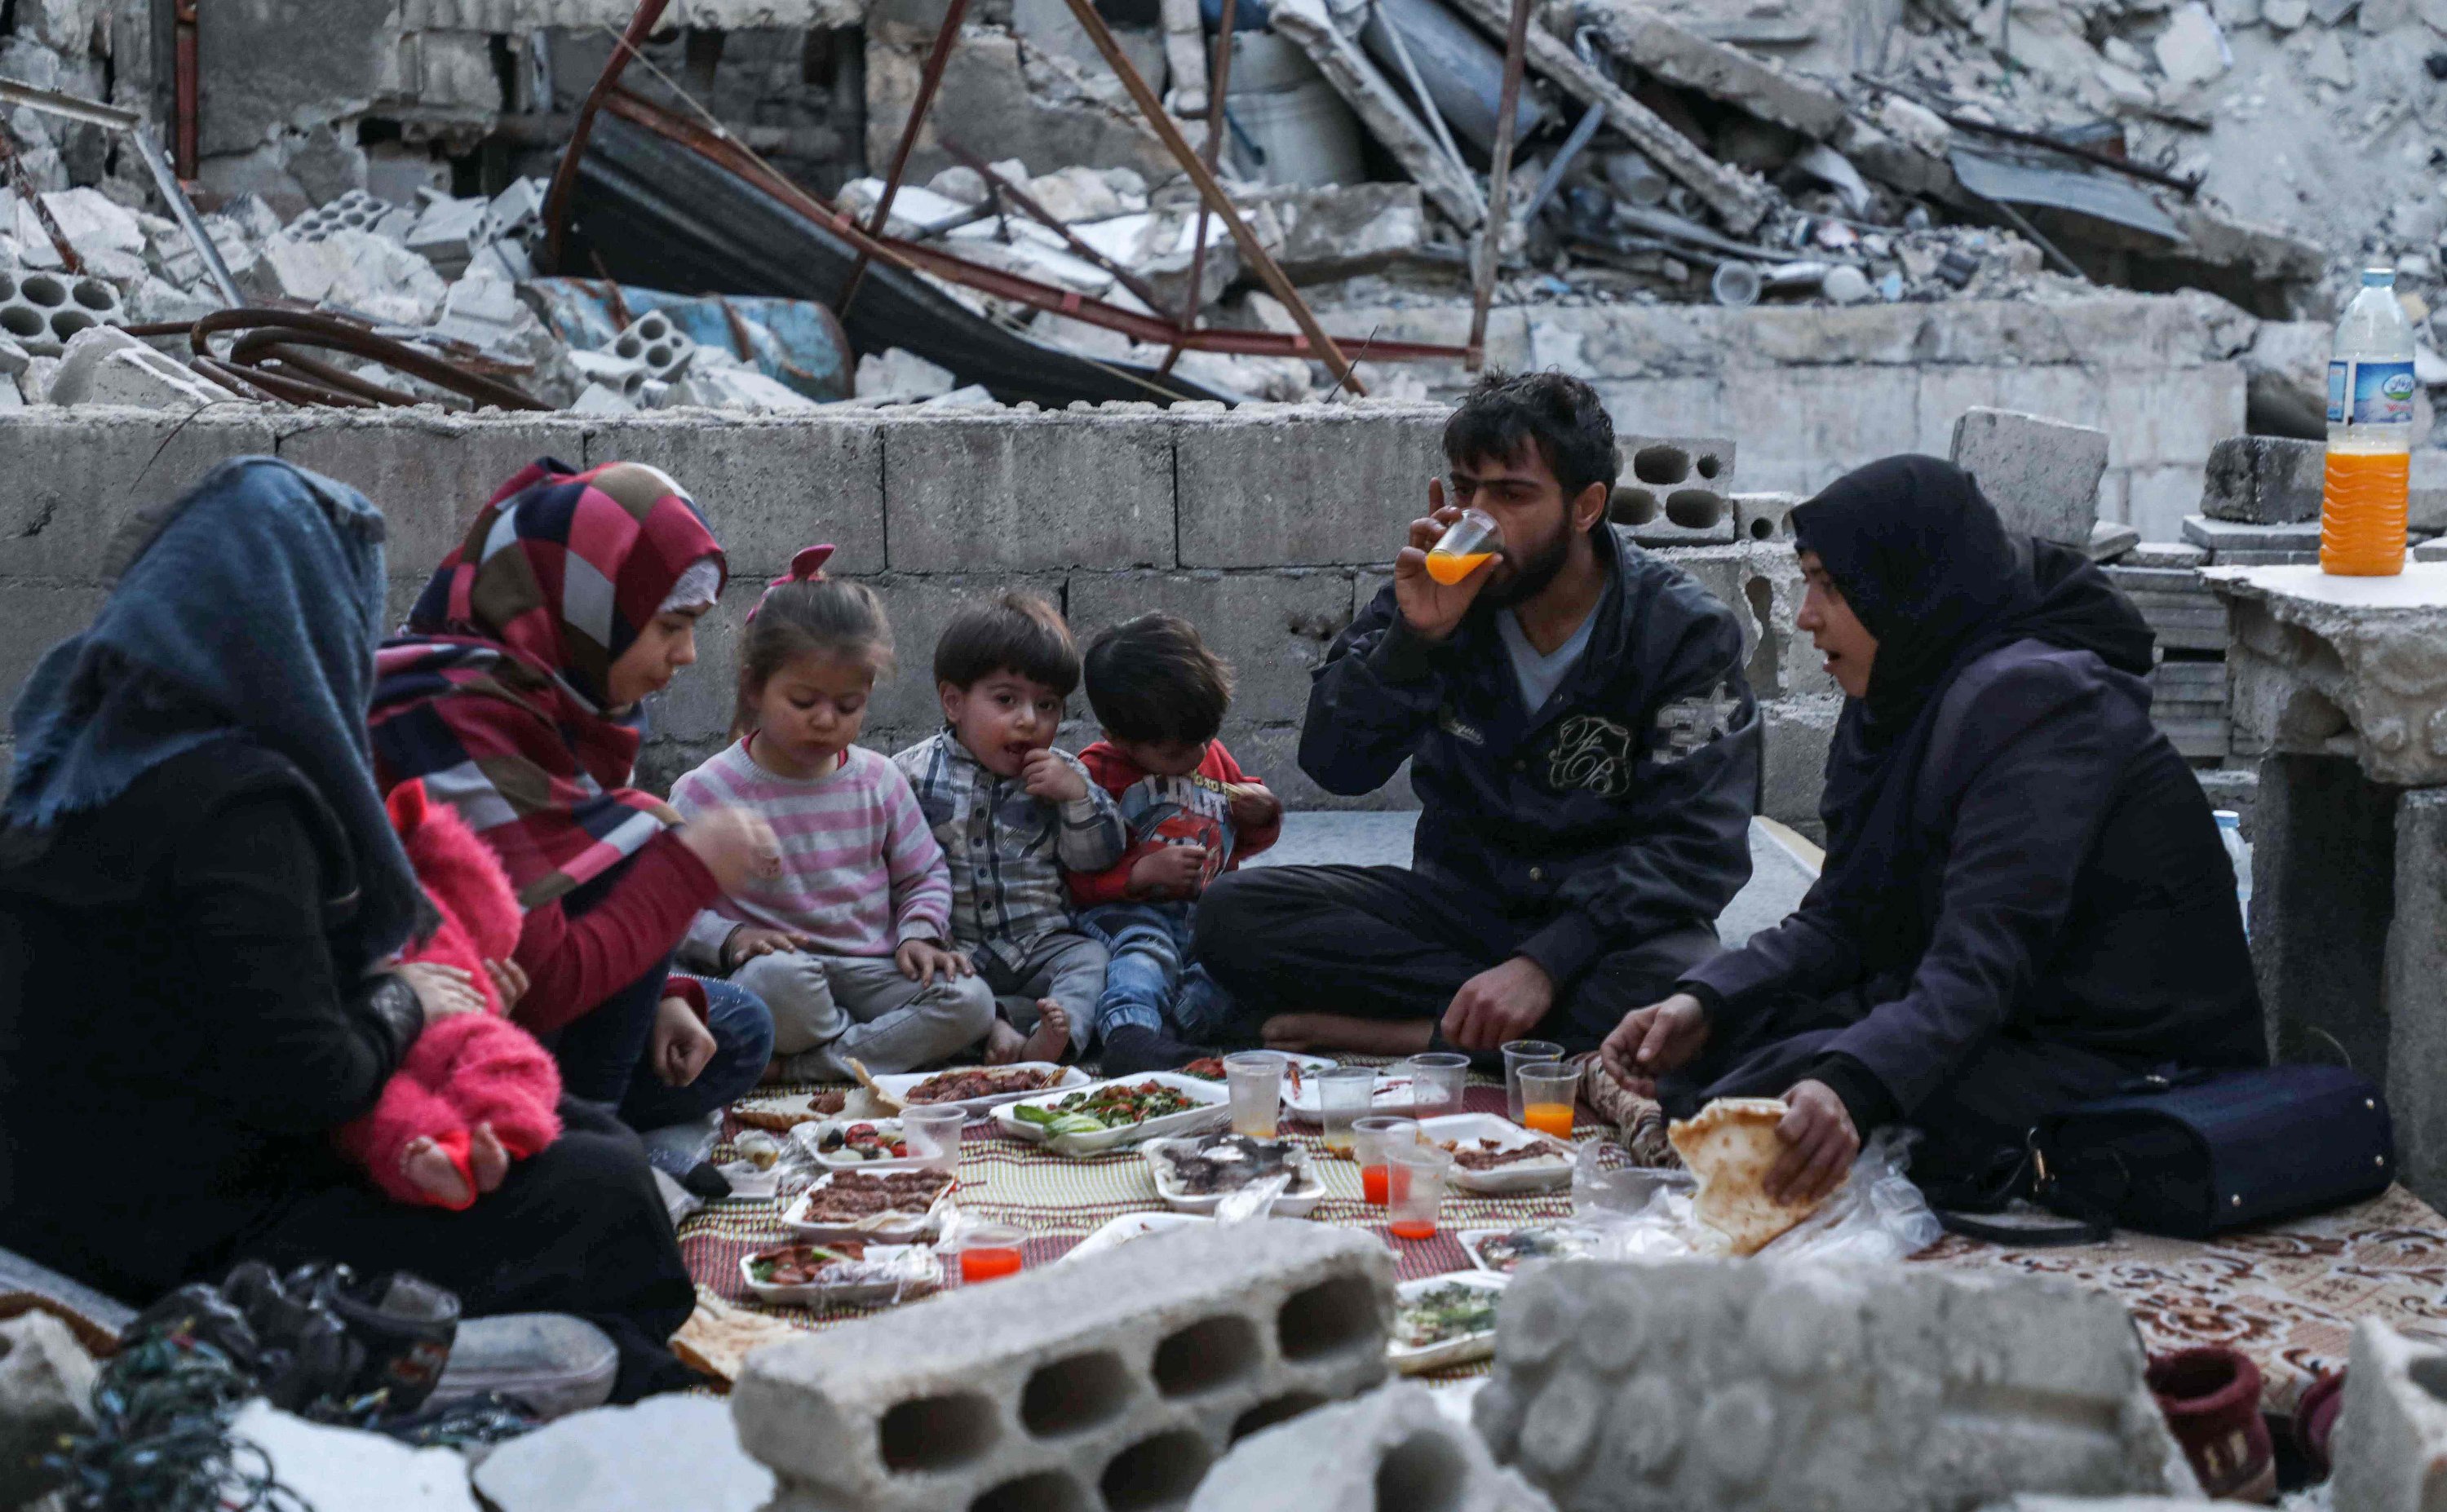 Members of the displaced Syrian family of Tariq Abu Ziad, from the town of Ariha in the southern countryside of Idlib province, break their fast together for the sunset 'iftar' meal in the midst of the rubble of their destroyed home upon their return to the town, May 4, 2020. (AFP)